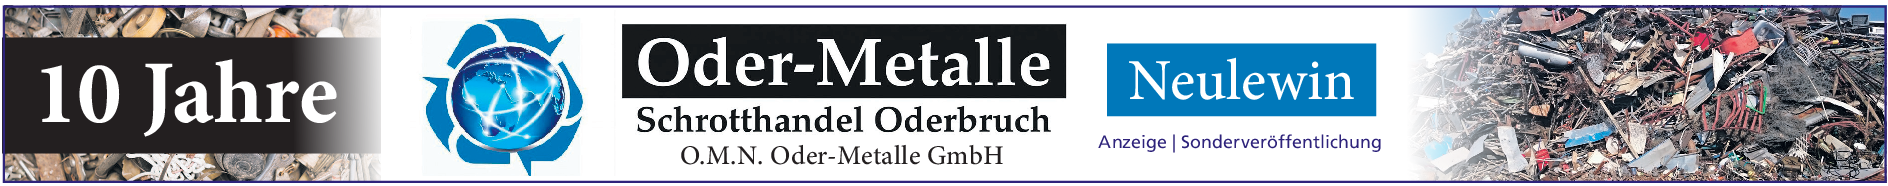 10 Jahre O.M.N. Oder-Metalle GmbH in Neulewin